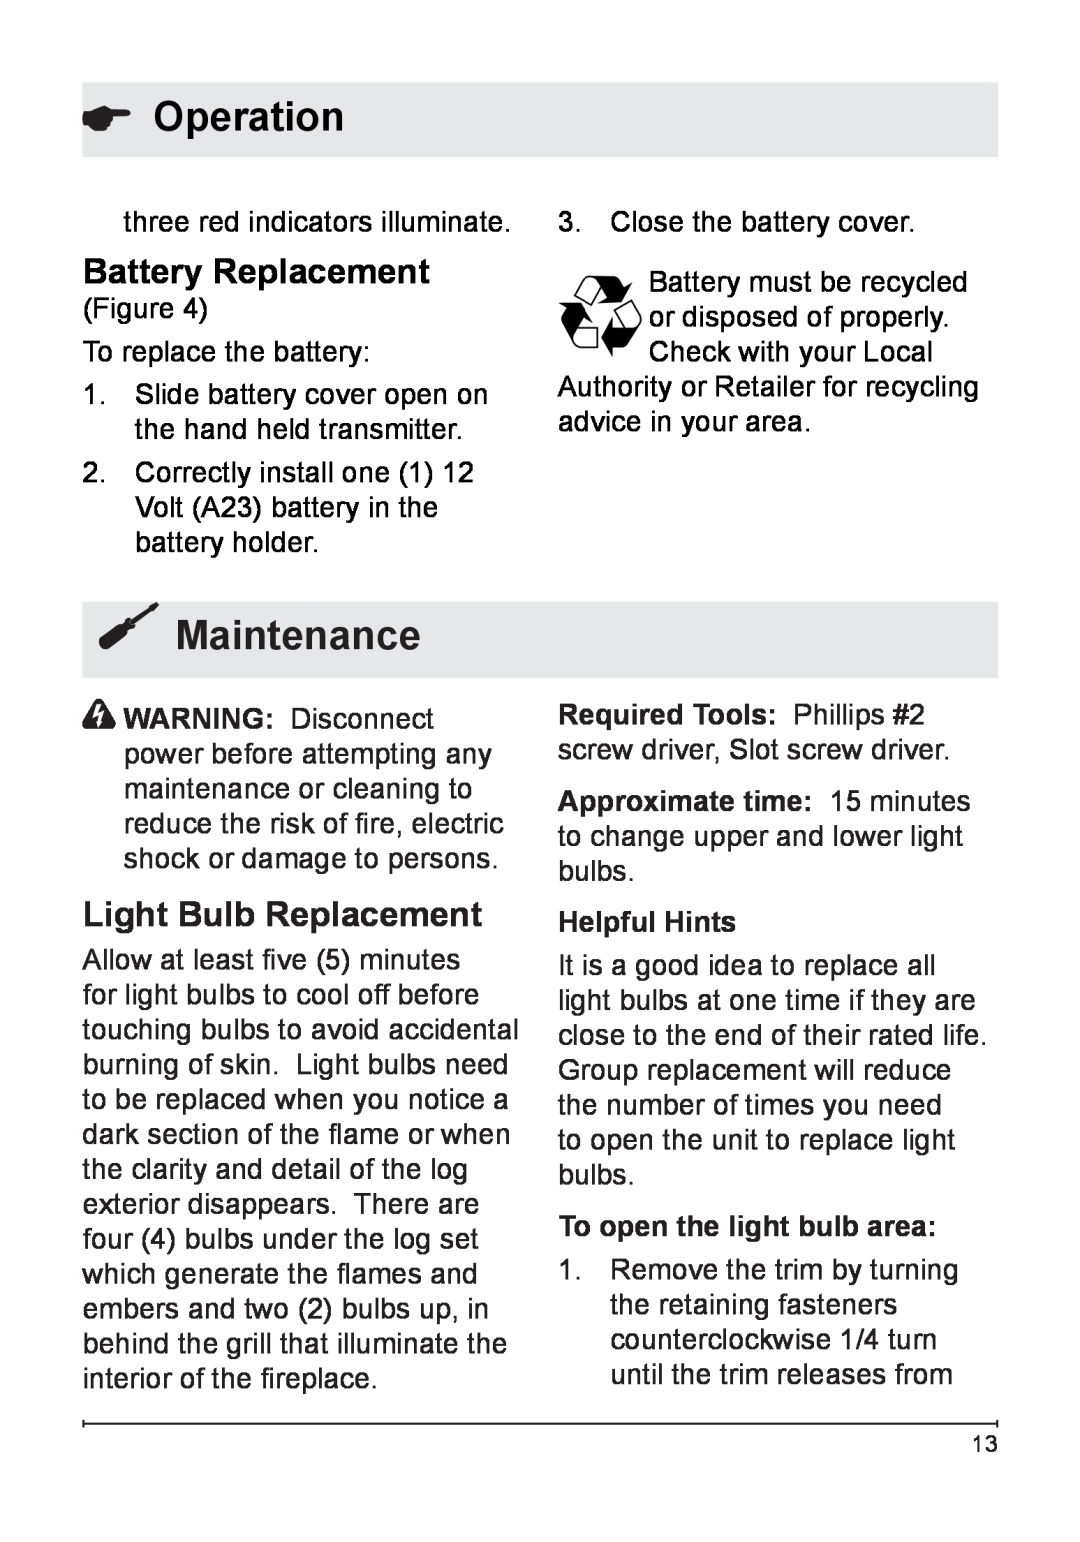 Dimplex DF3003 owner manual Maintenance, Battery Replacement, Light Bulb Replacement, Operation, Helpful Hints 